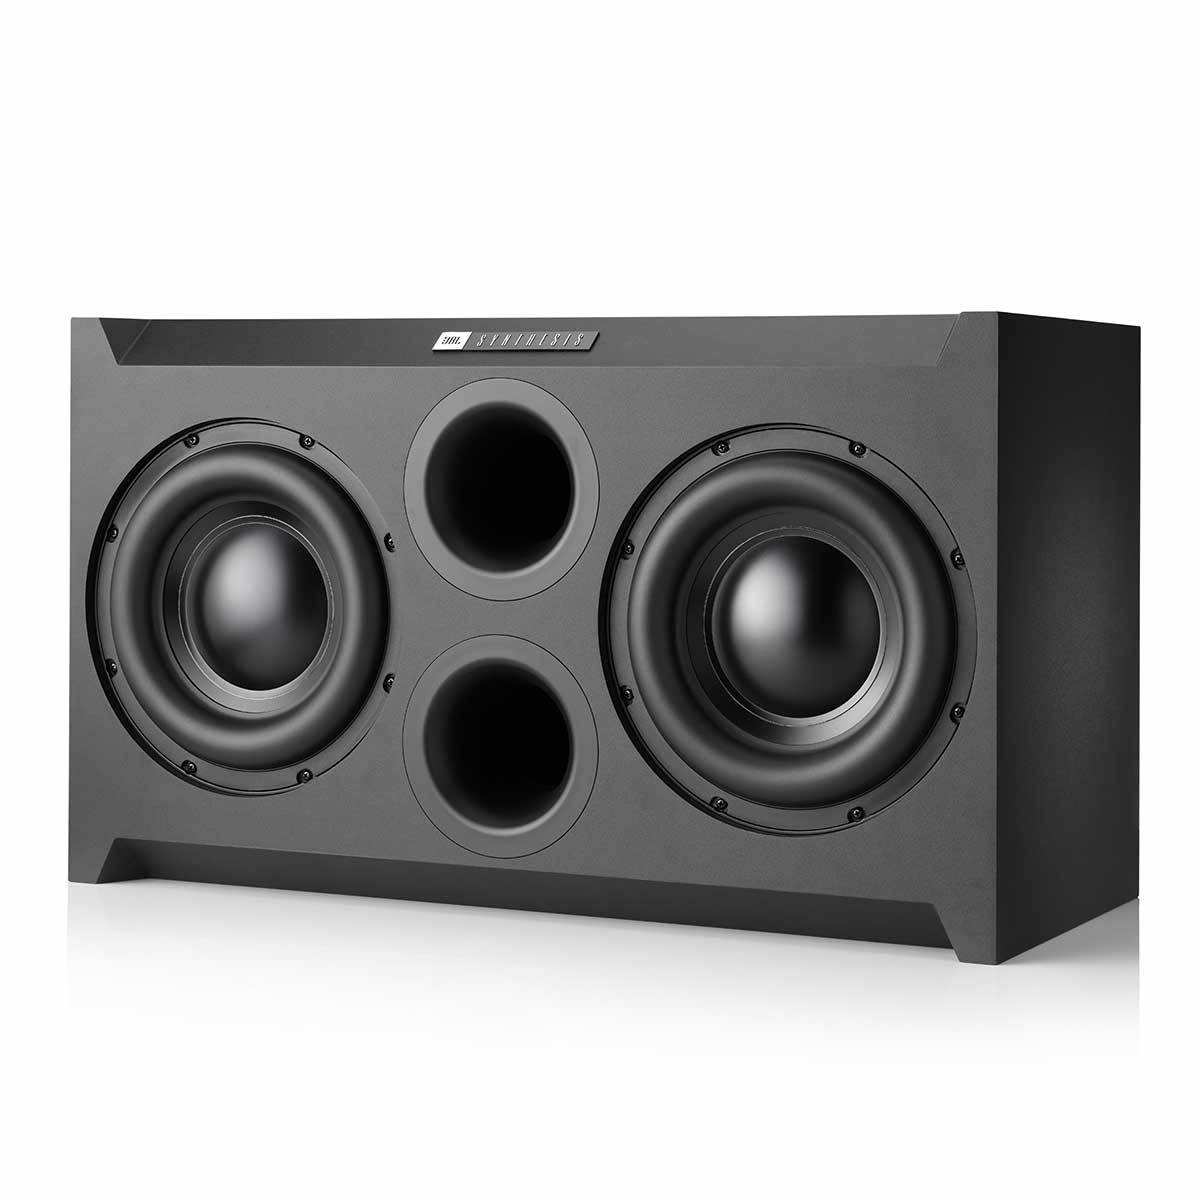 JBL Synthesis SSW-2 Dual Subwoofer, Black, front angle